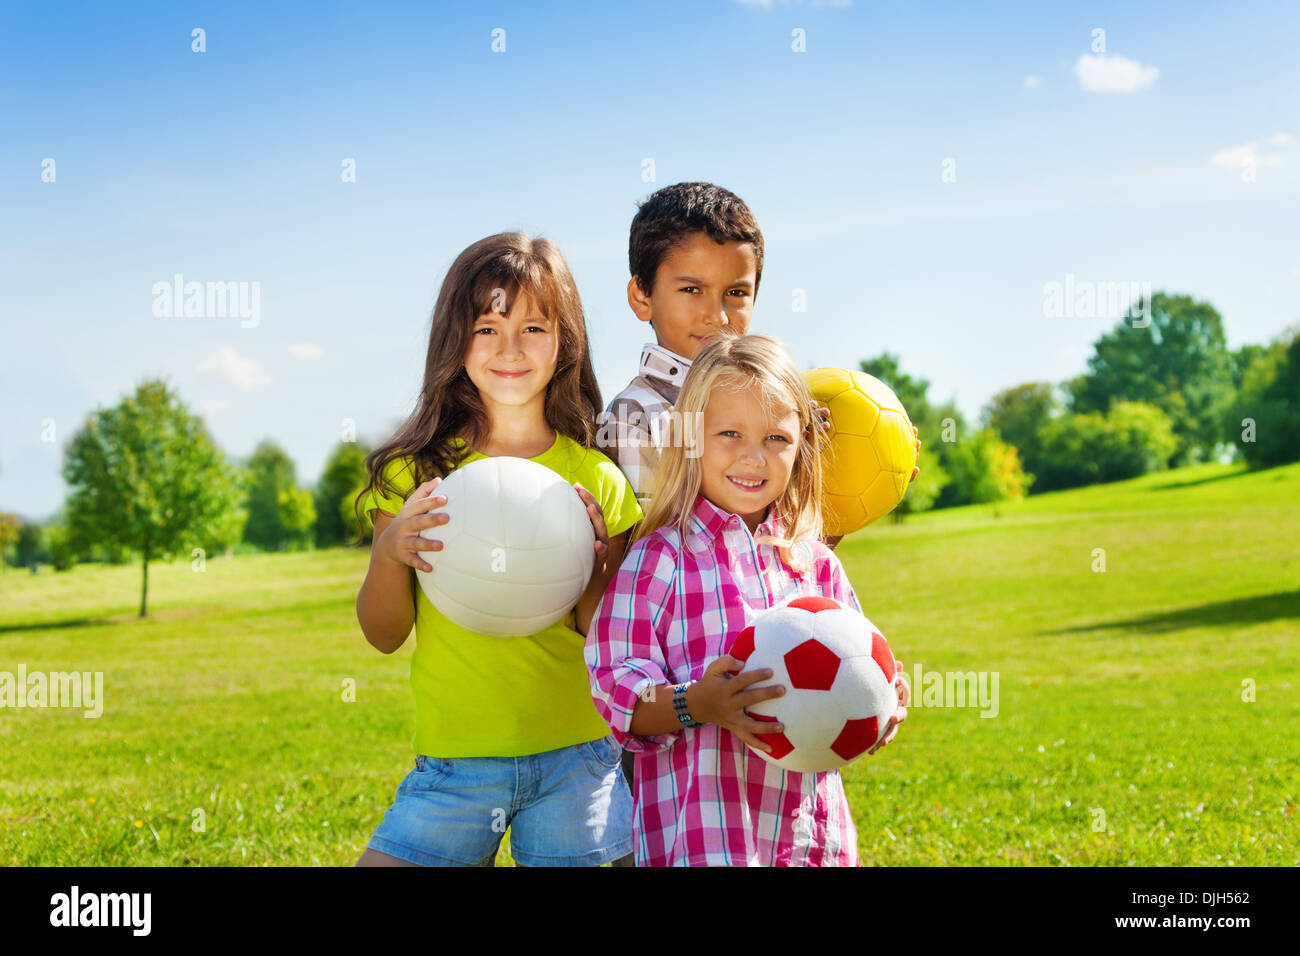 Team of three happy kids, boy and girls standing in the sunny summer park holding sport balls Stock Photo